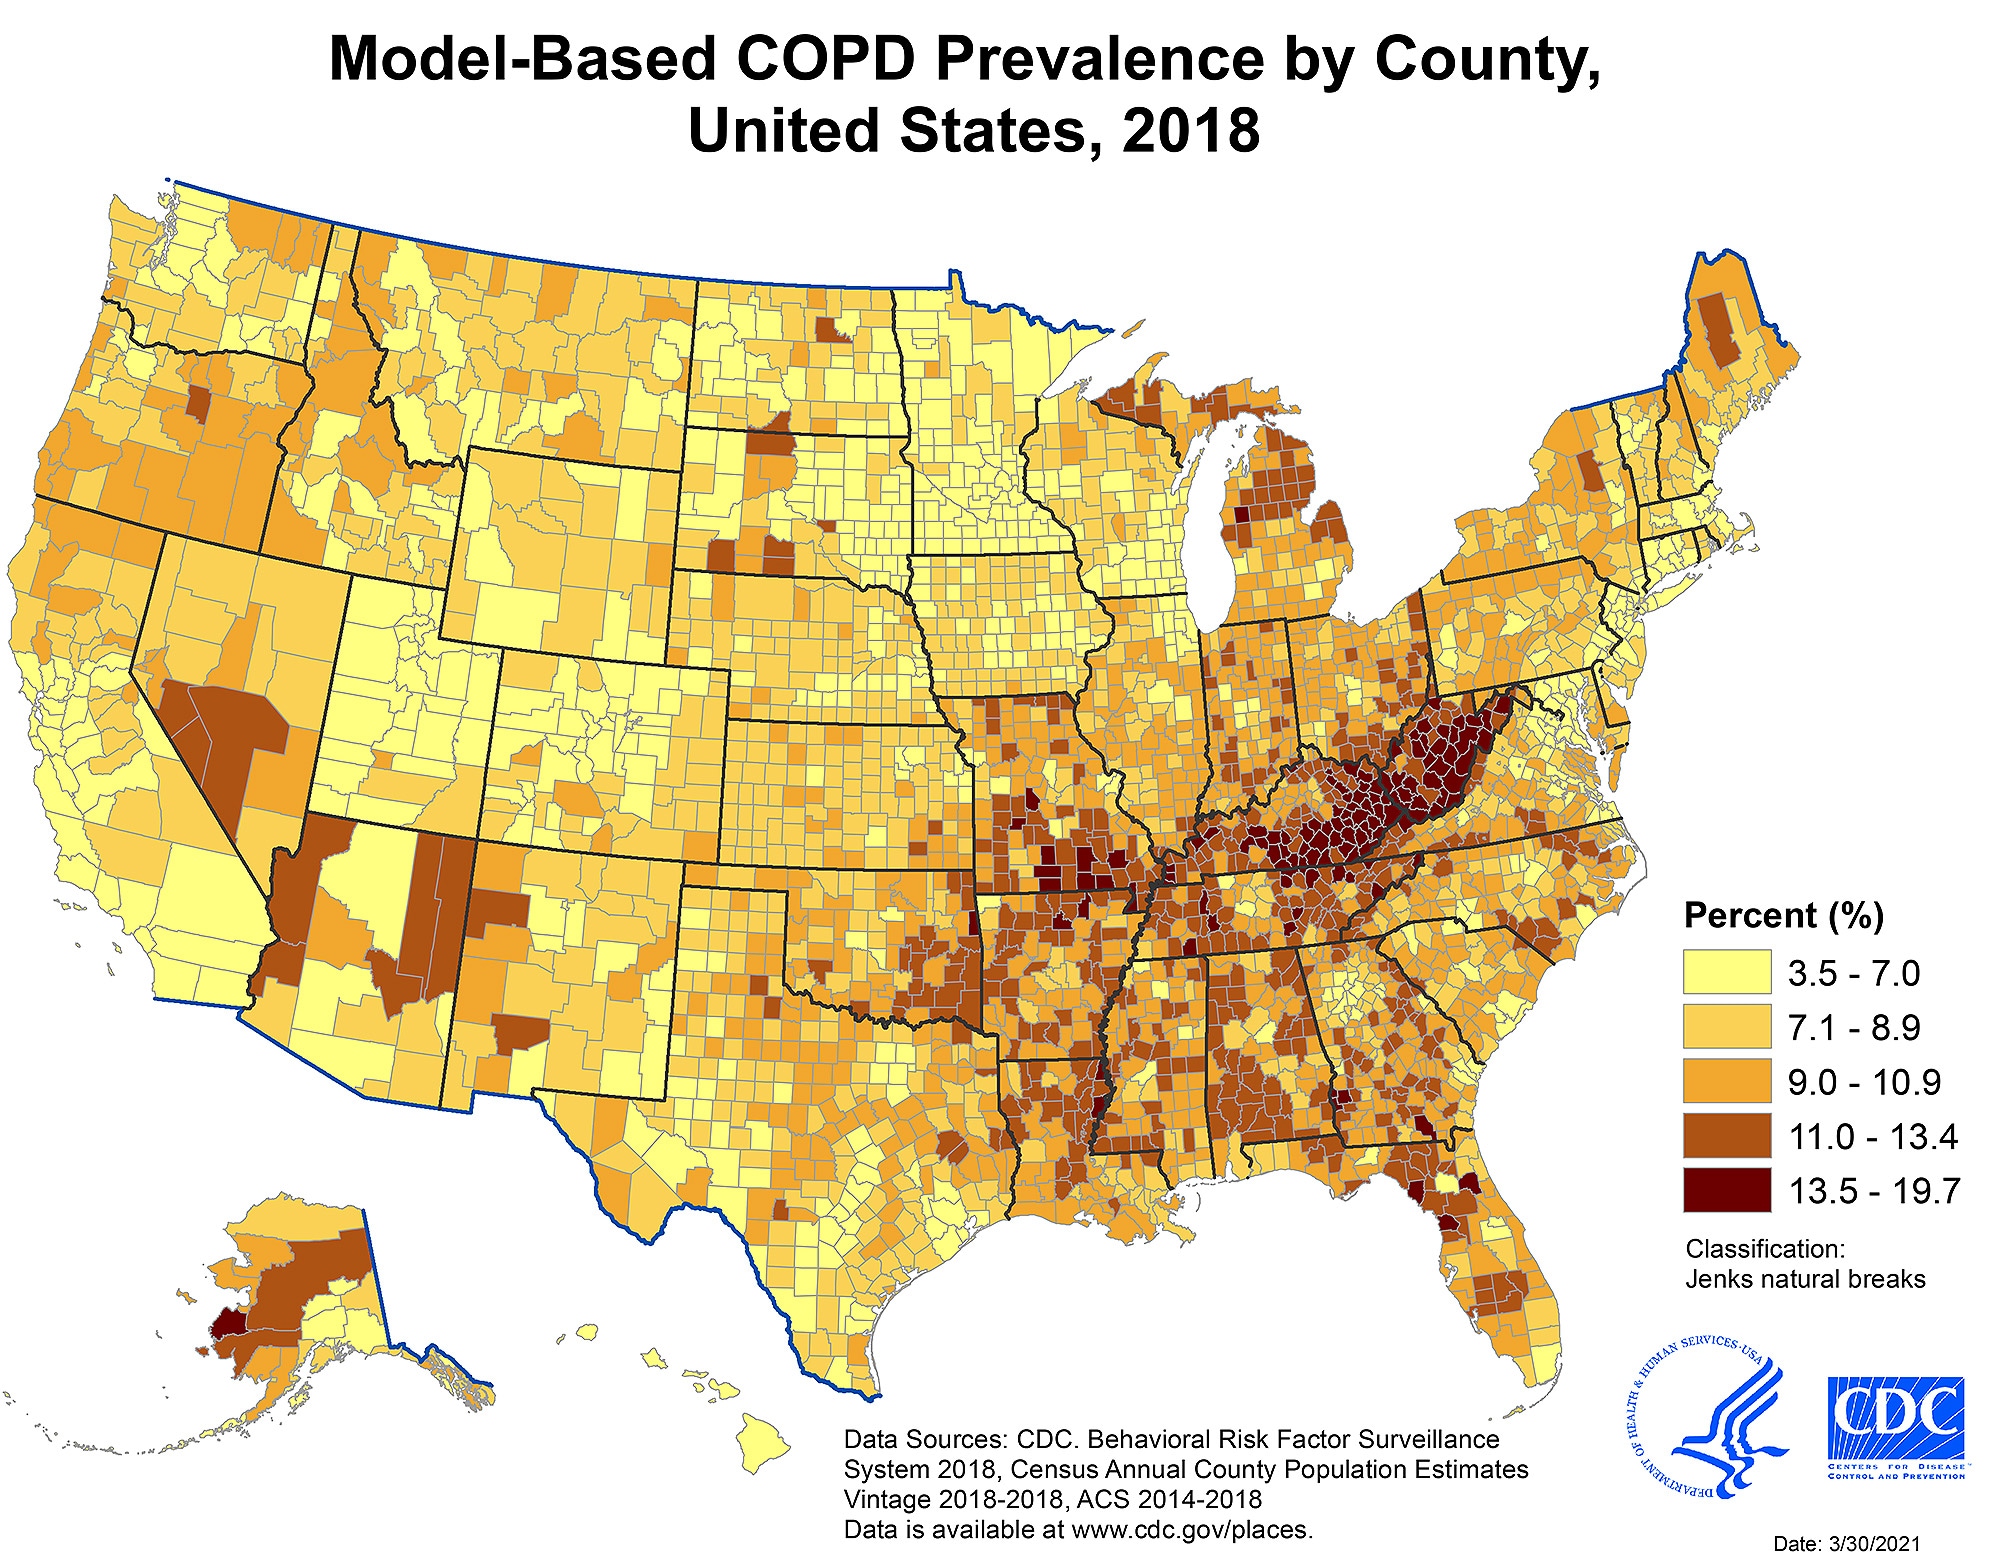 Counties with the highest model-based COPD prevalence estimates were clustered along the Ohio and lower Mississippi rivers